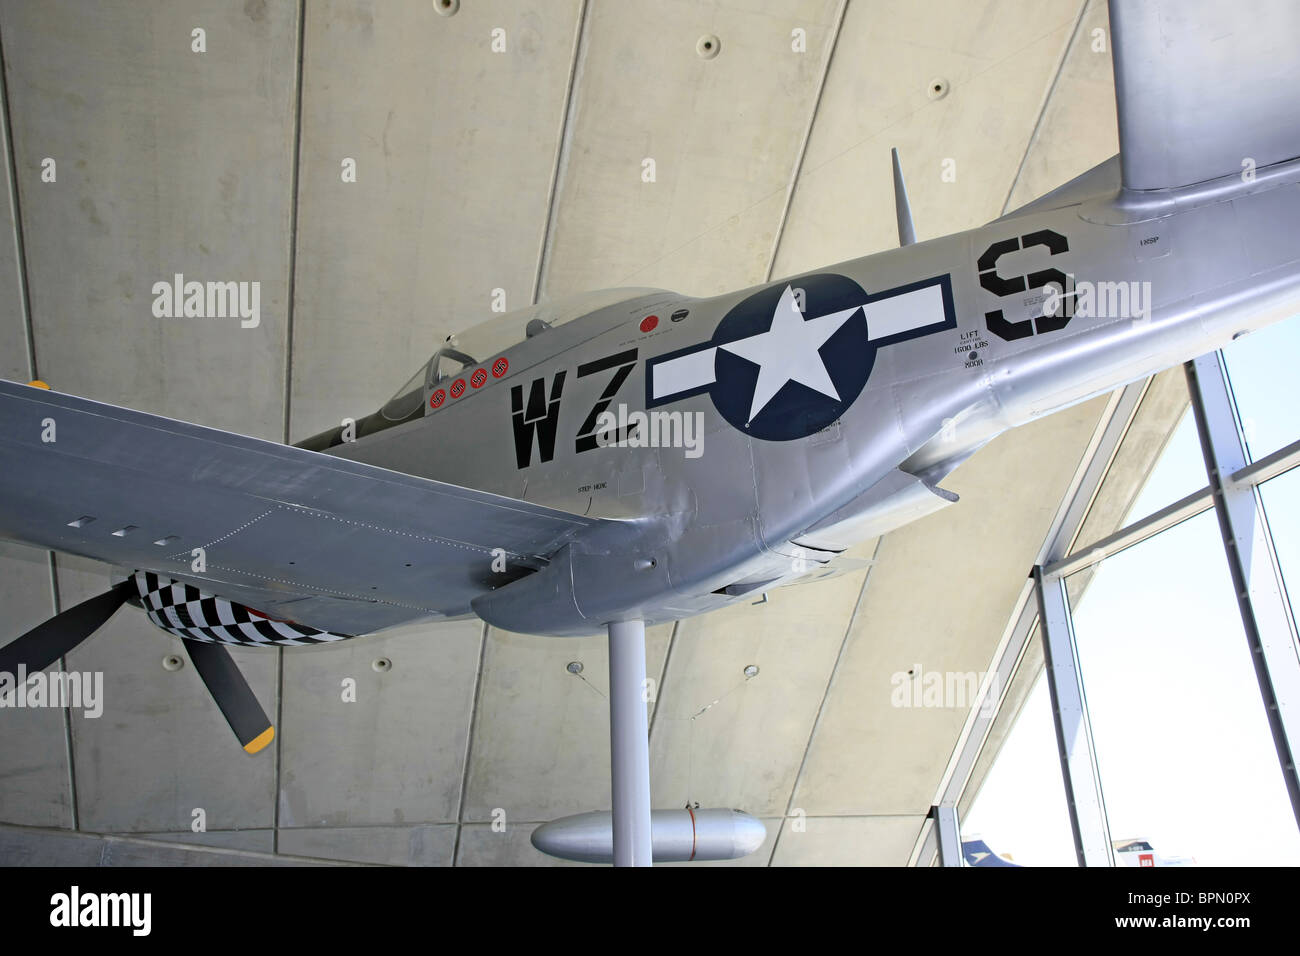 https://c8.alamy.com/comp/BPN0PX/a-p51-mustang-fighter-plane-on-display-hanging-from-the-ceiling-of-BPN0PX.jpg